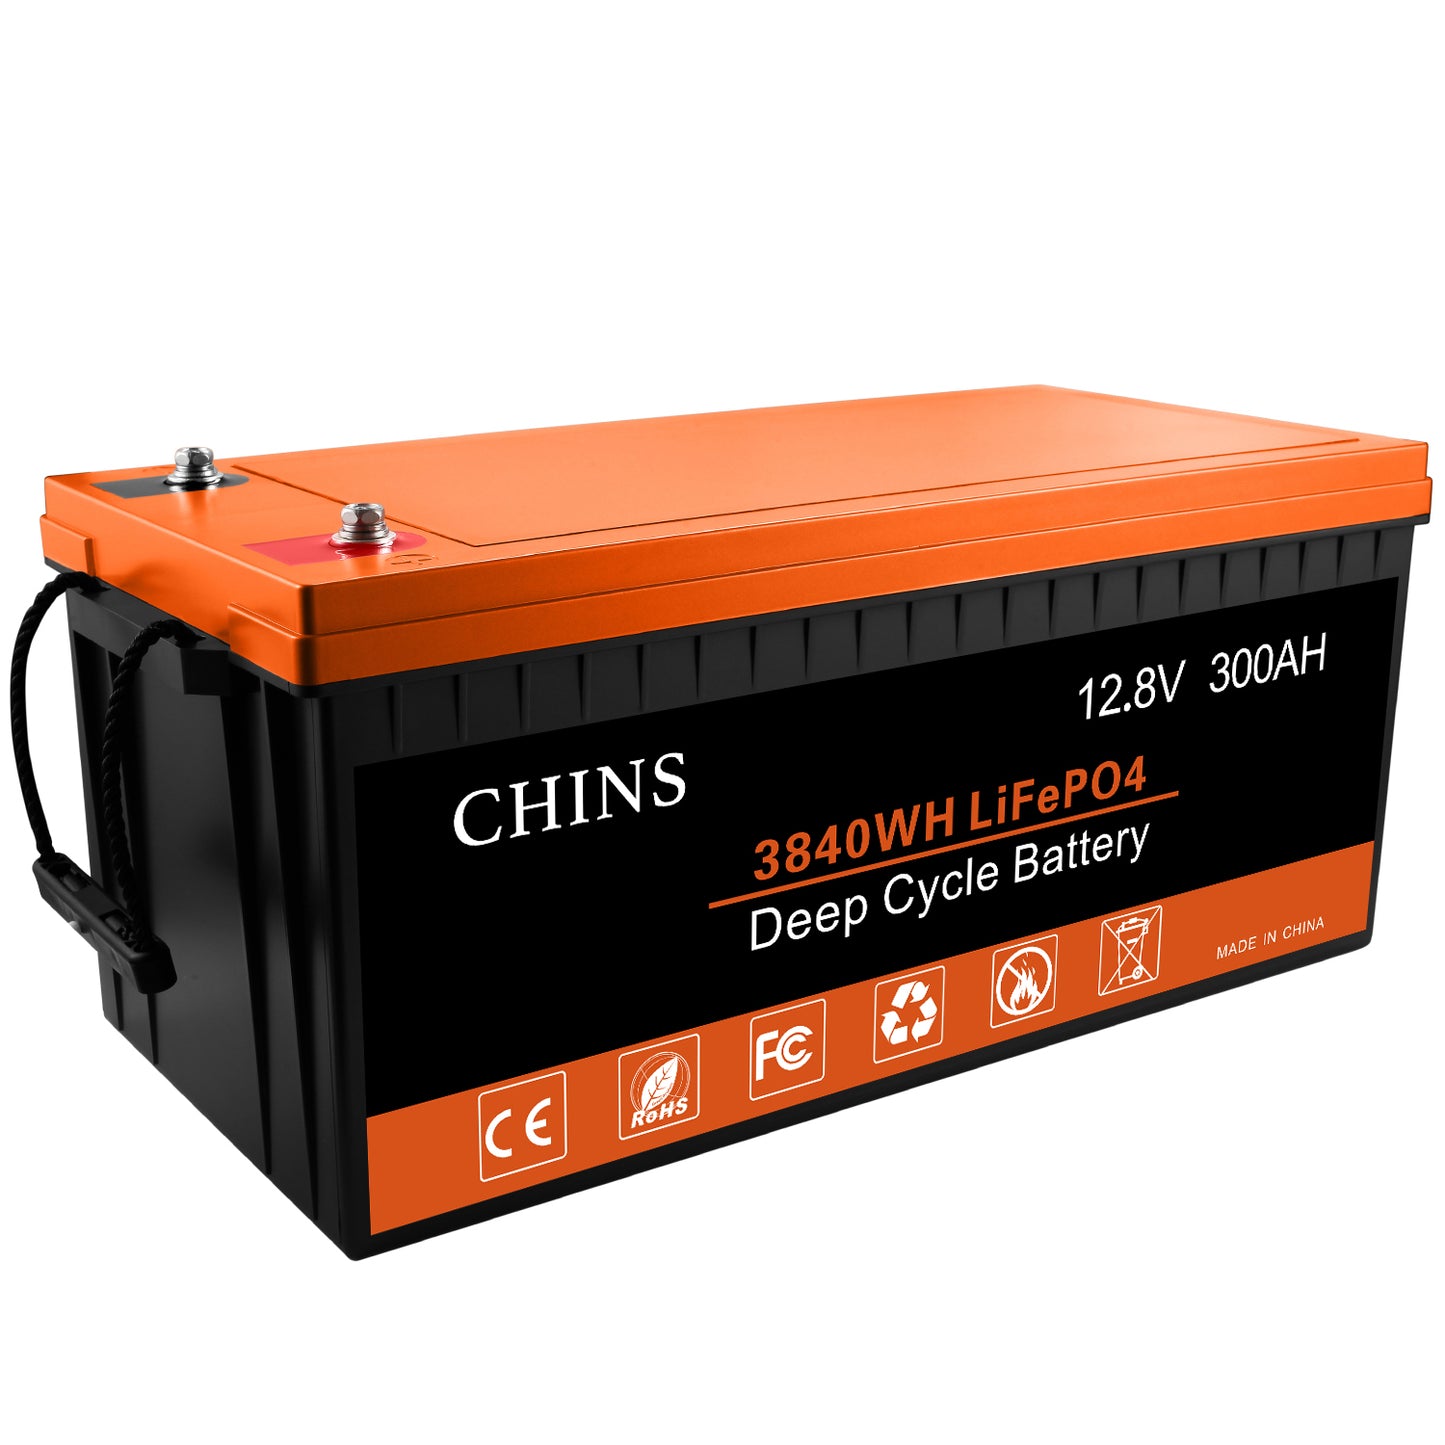 CHINS 12V 300Ah LiFePO4 Lithium Battery - Built-in 200A BMS, Perfect for Replacing Most of Backup Power, Home Energy Storage and Off-Grid etc.